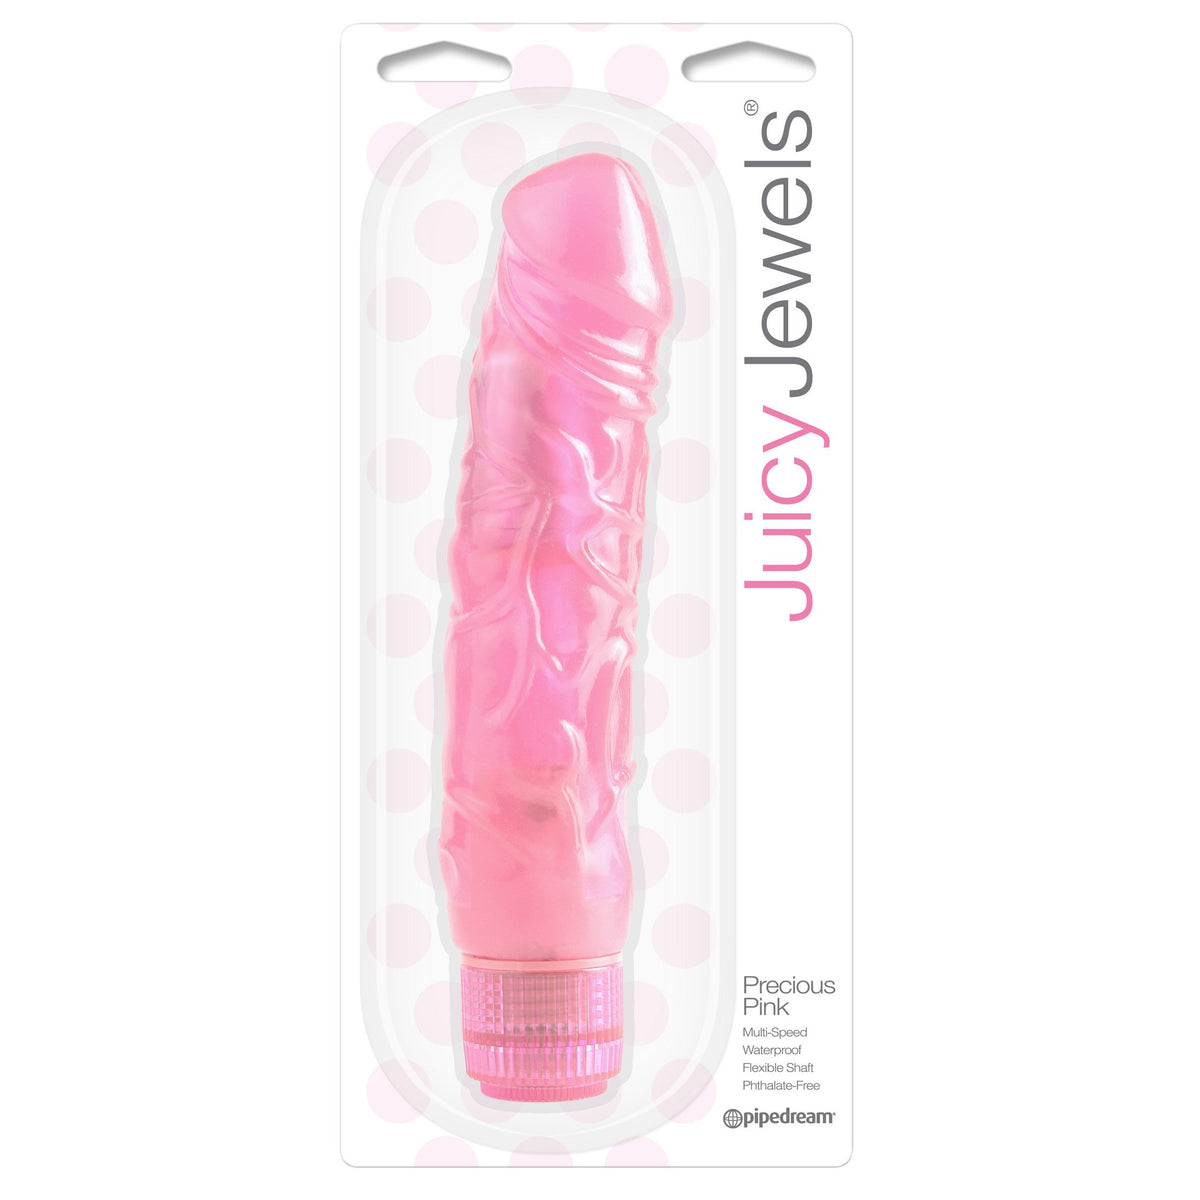 Pipedream Products Juicy Jewels Precious Pink Vibe